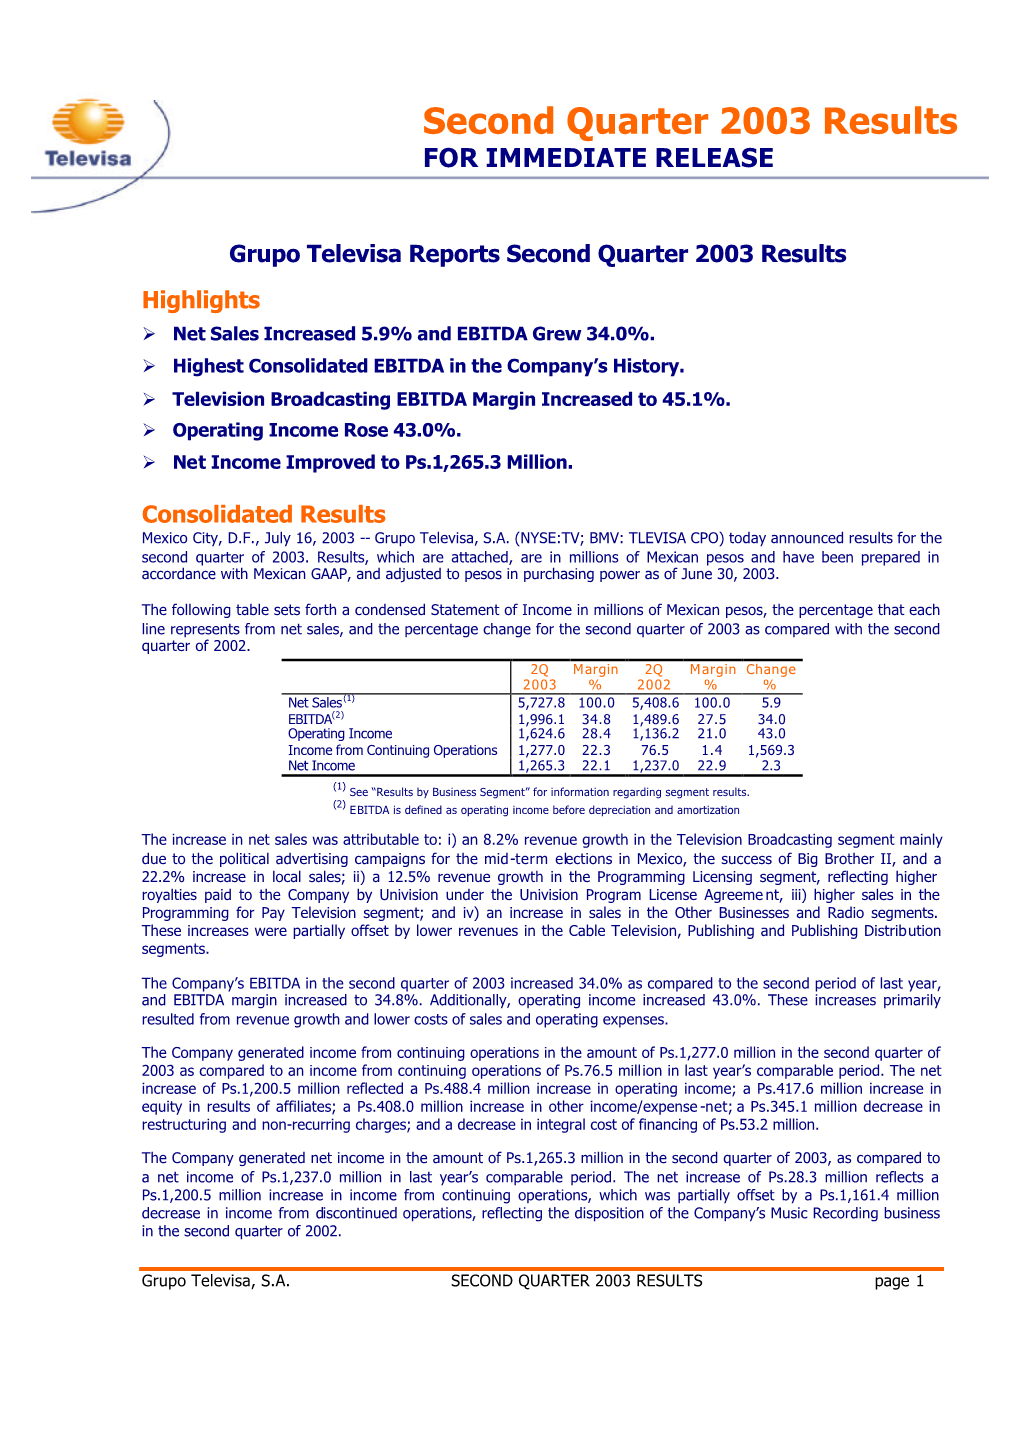 Second Quarter 2003 Results for IMMEDIATE RELEASE